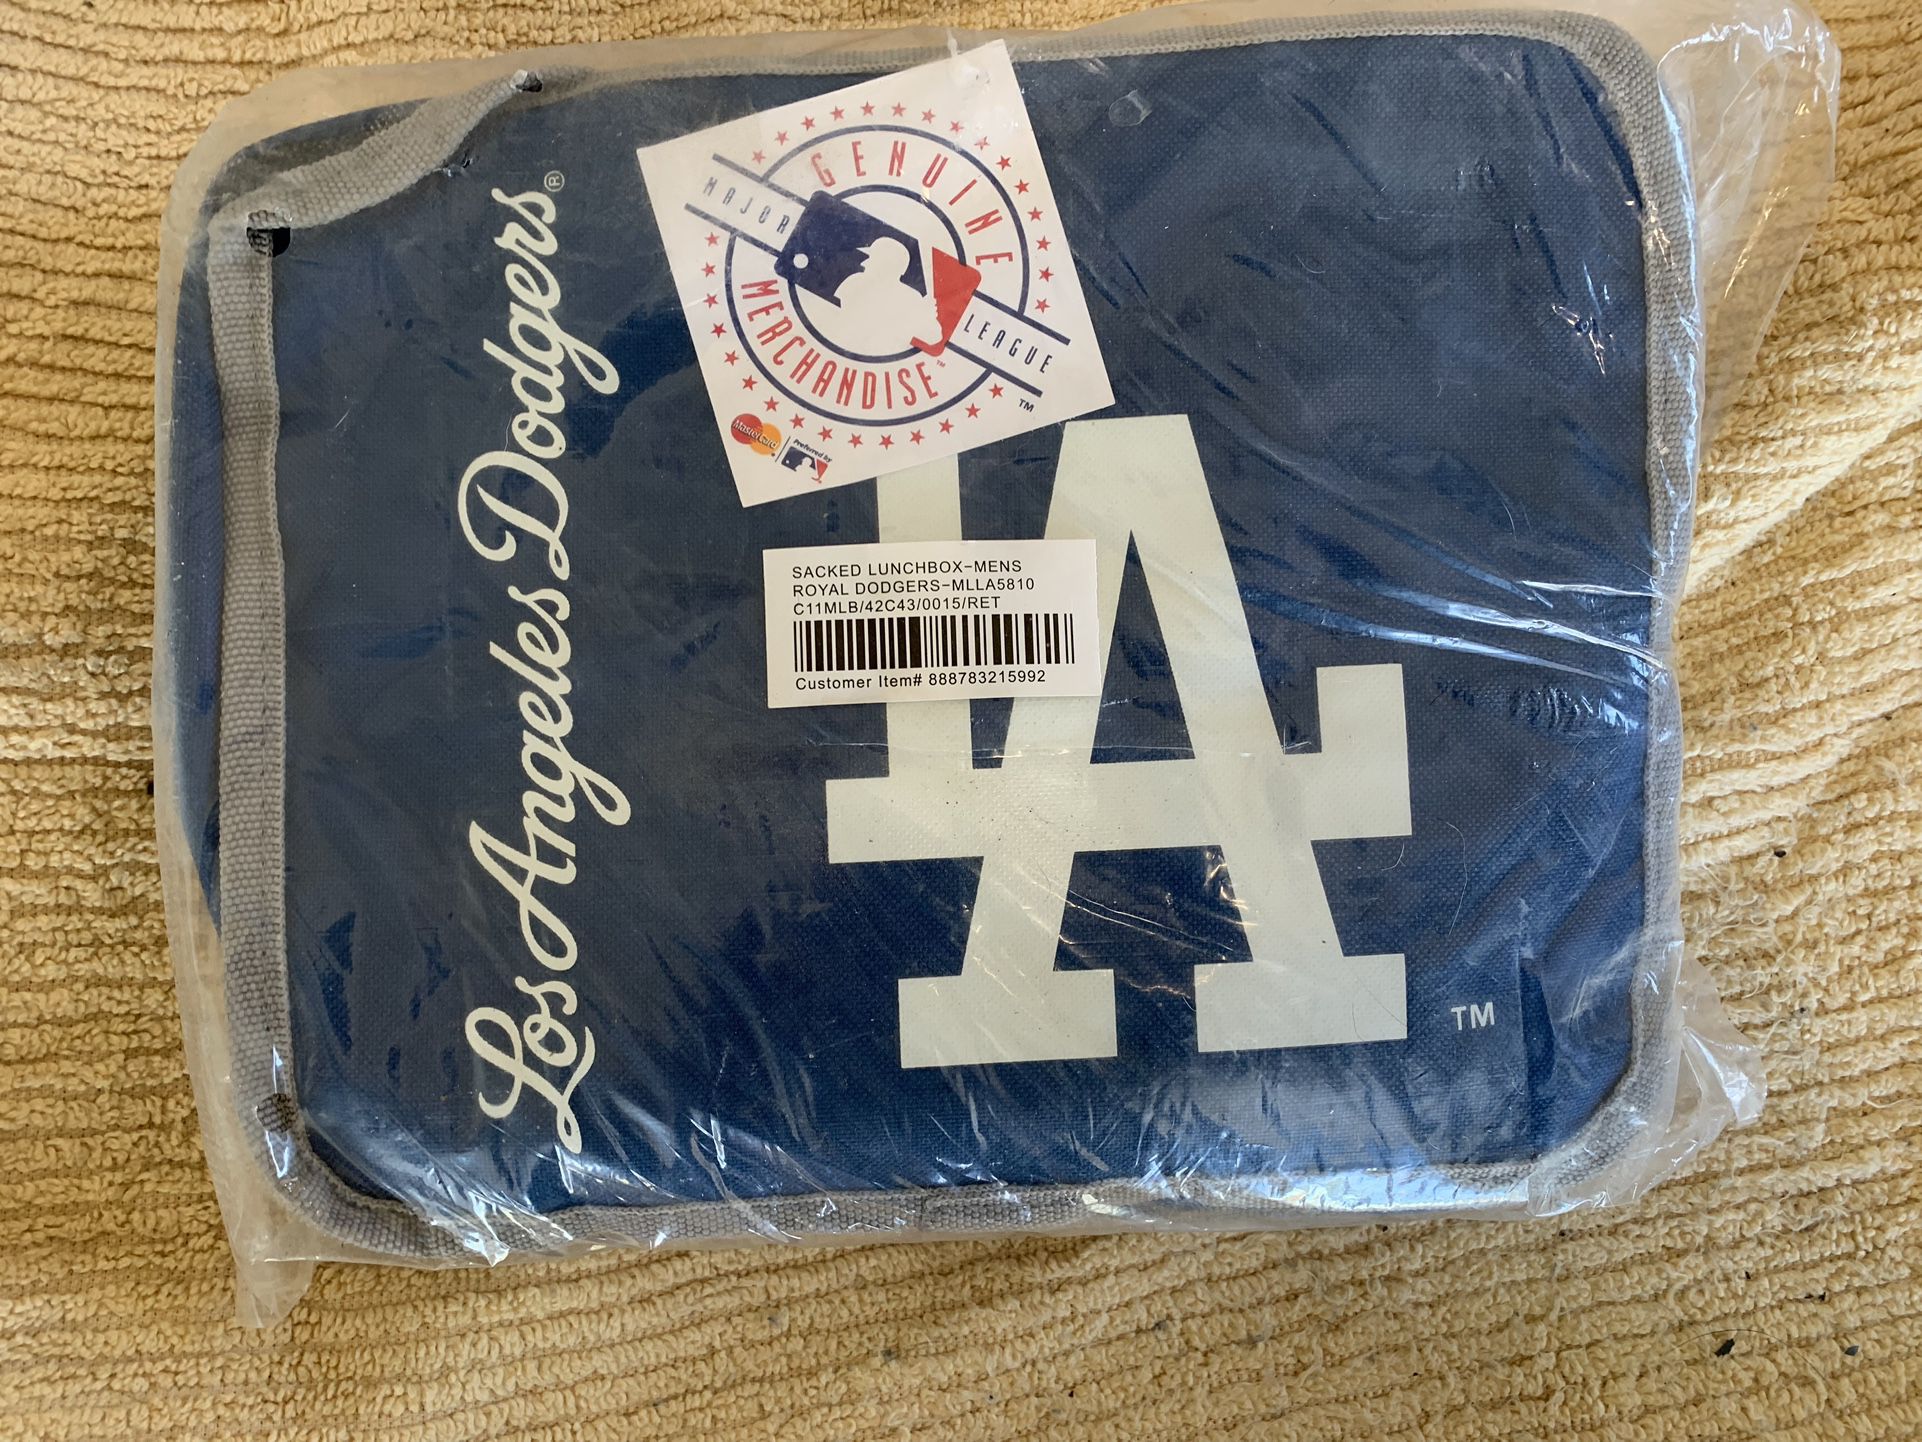 Dodgers soft lunch box